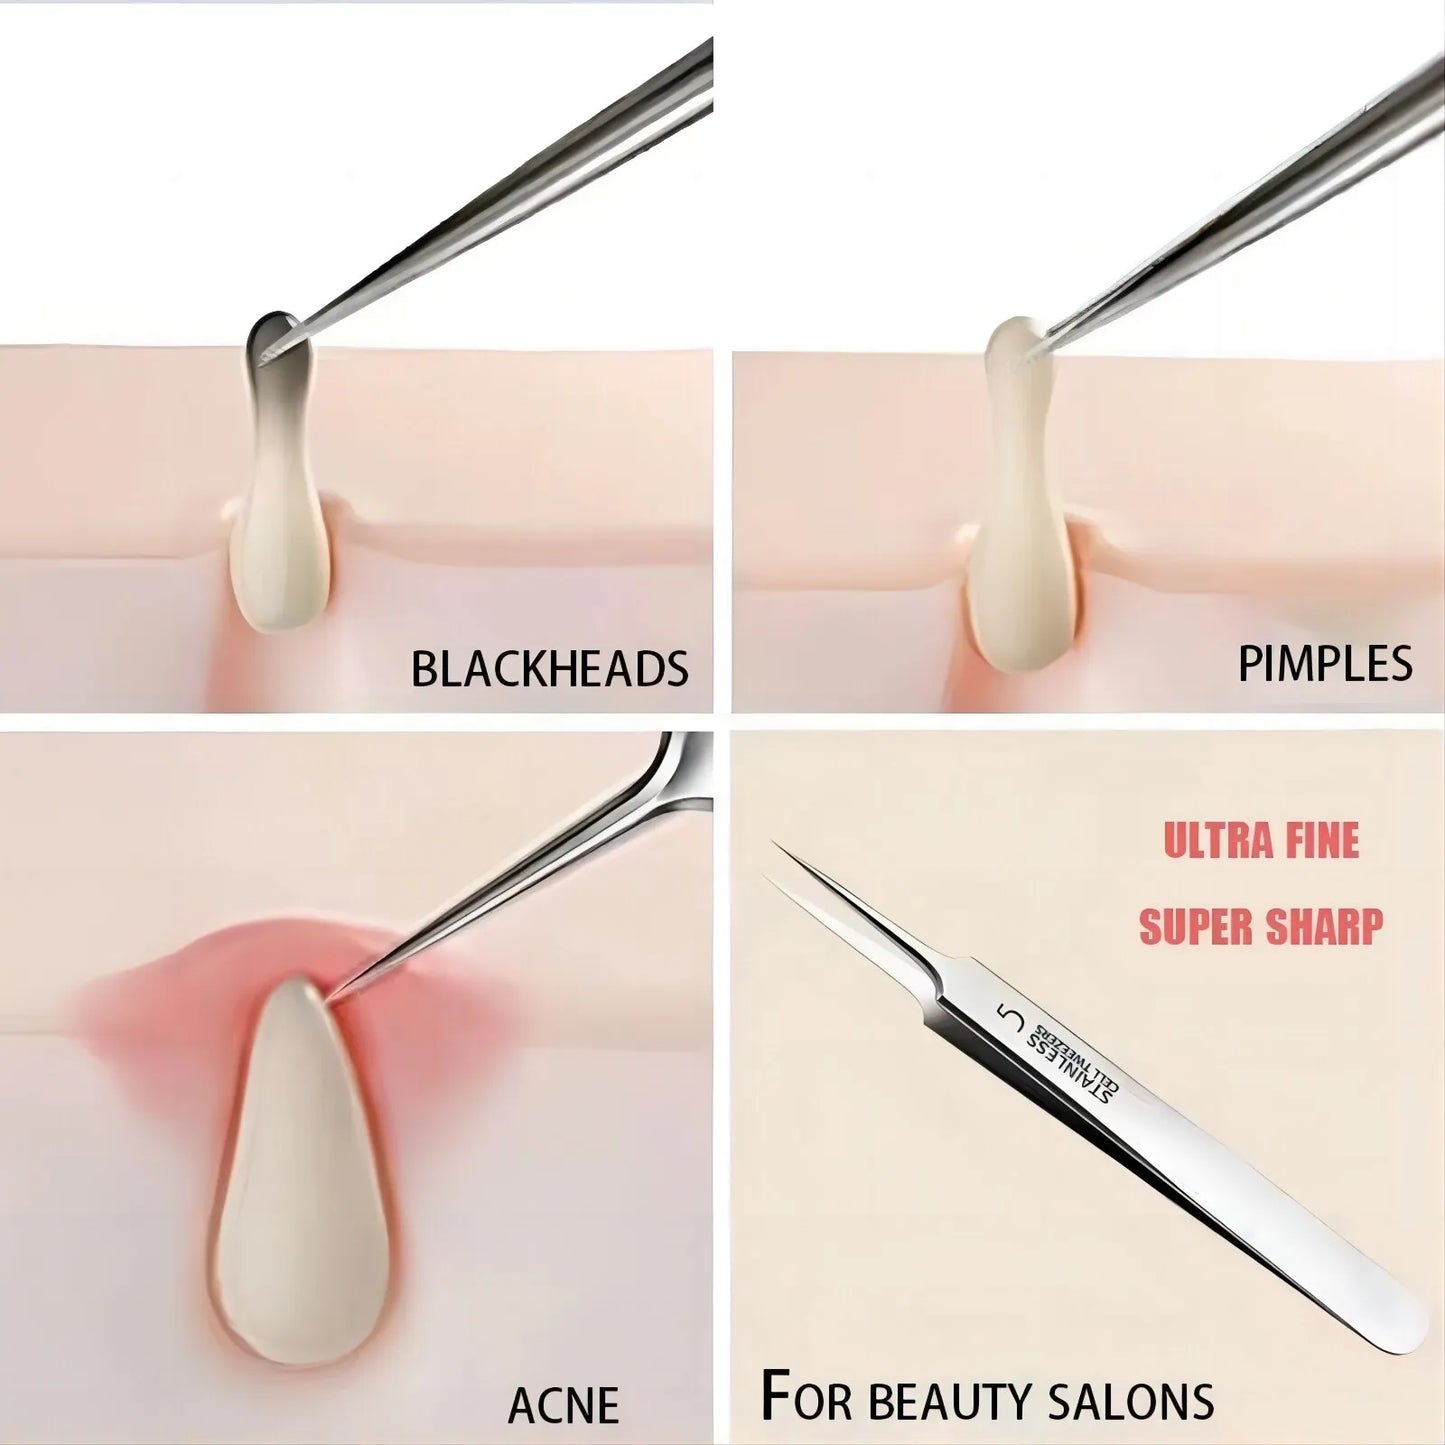 Facial Pore Cleaning Care Tools